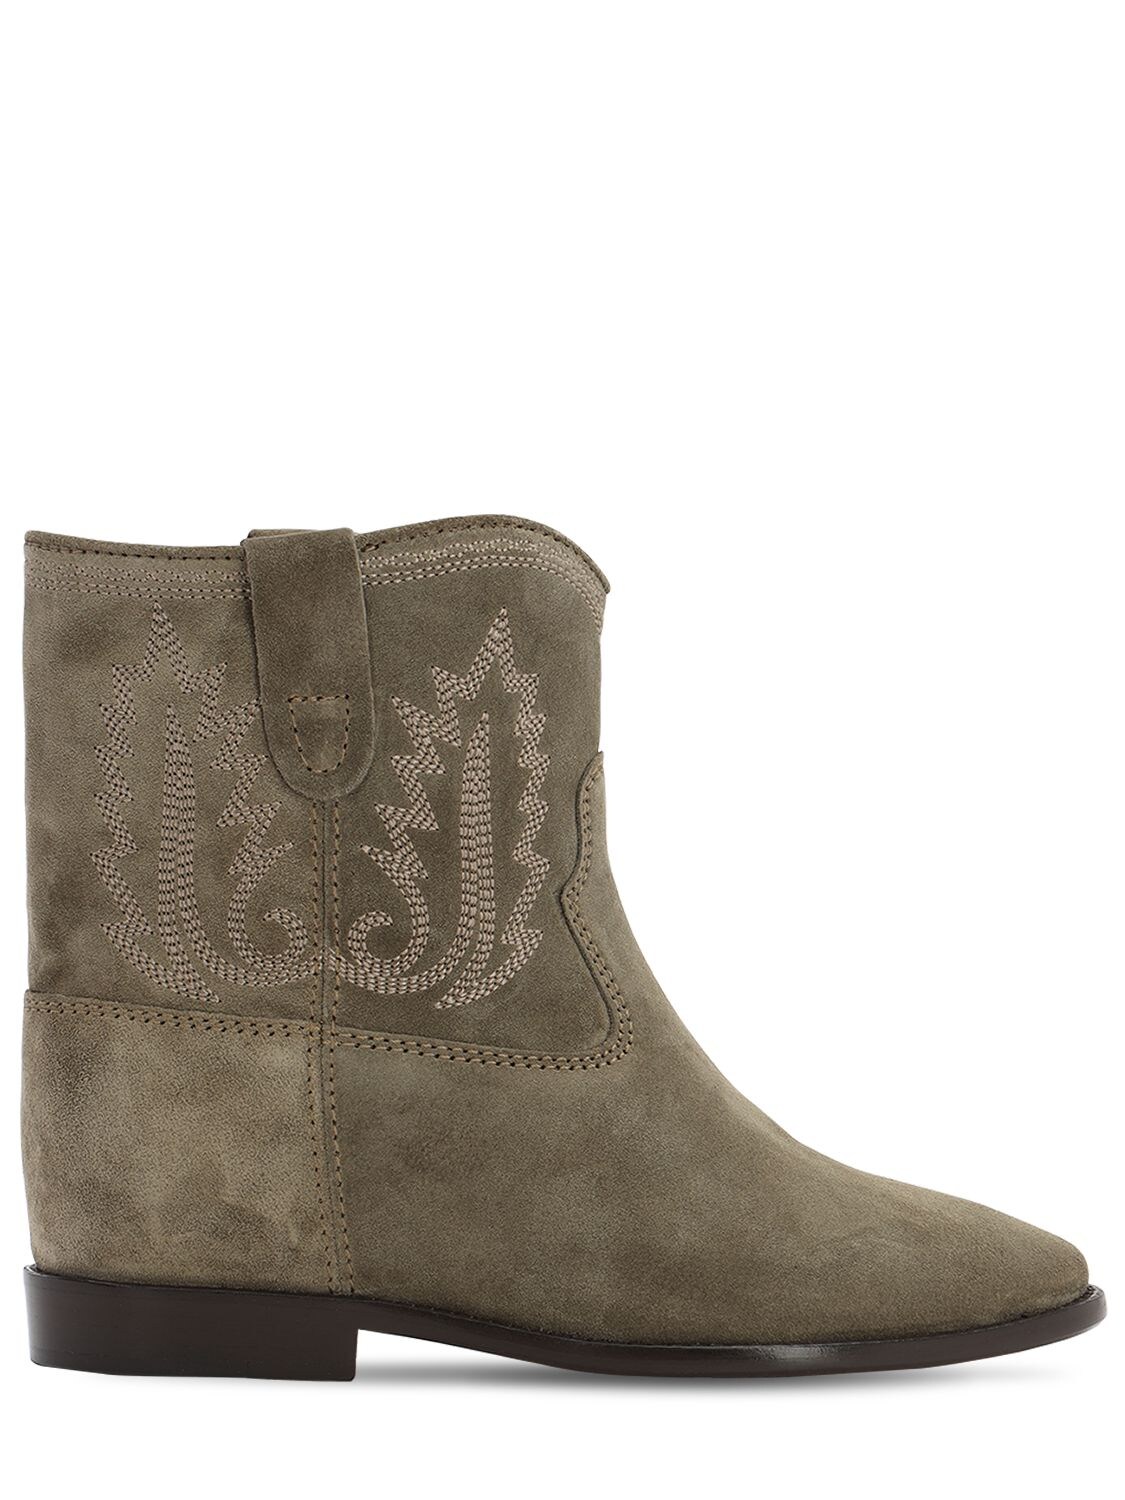 ISABEL MARANT 60MM CRISI SUEDE ANKLE BOOTS,71IE1C005-NTBUQQ2